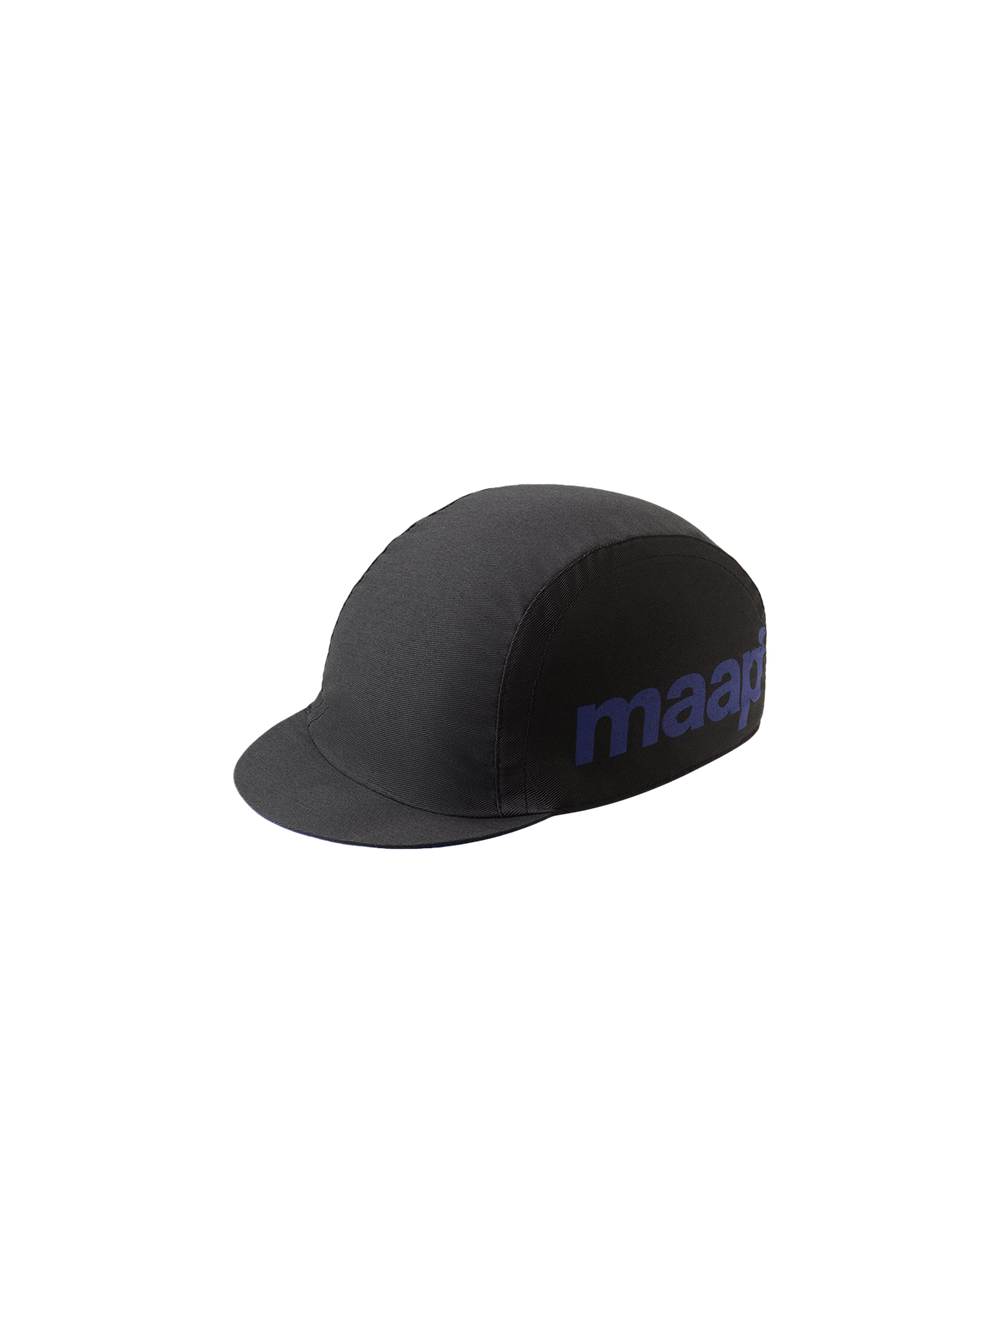 Product Image for Training Cap